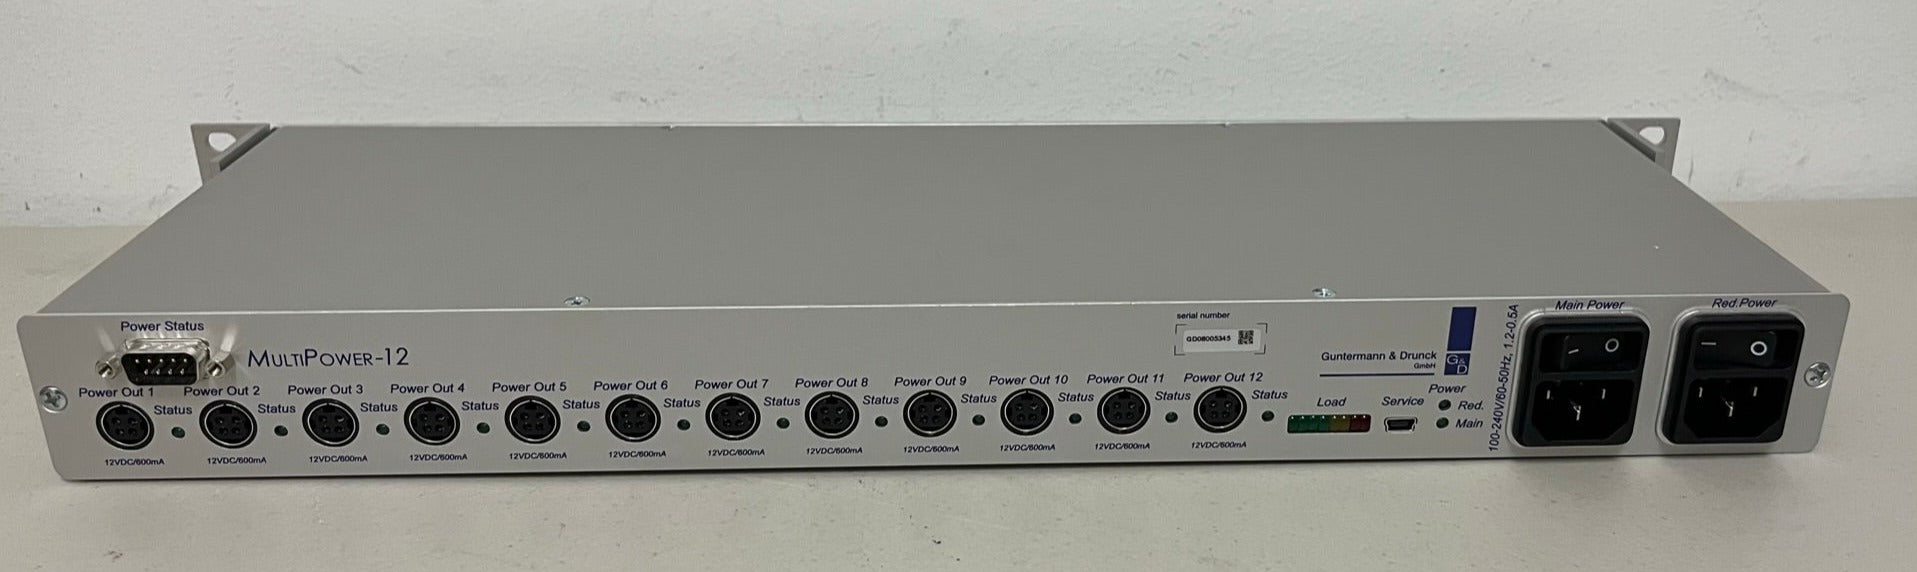 Used G&D MultiPower-12, We Sell Professional Audio Equipment. Audio Systems, Amplifiers, Consoles, Mixers, Electronics, Entertainment, Sound, Live.